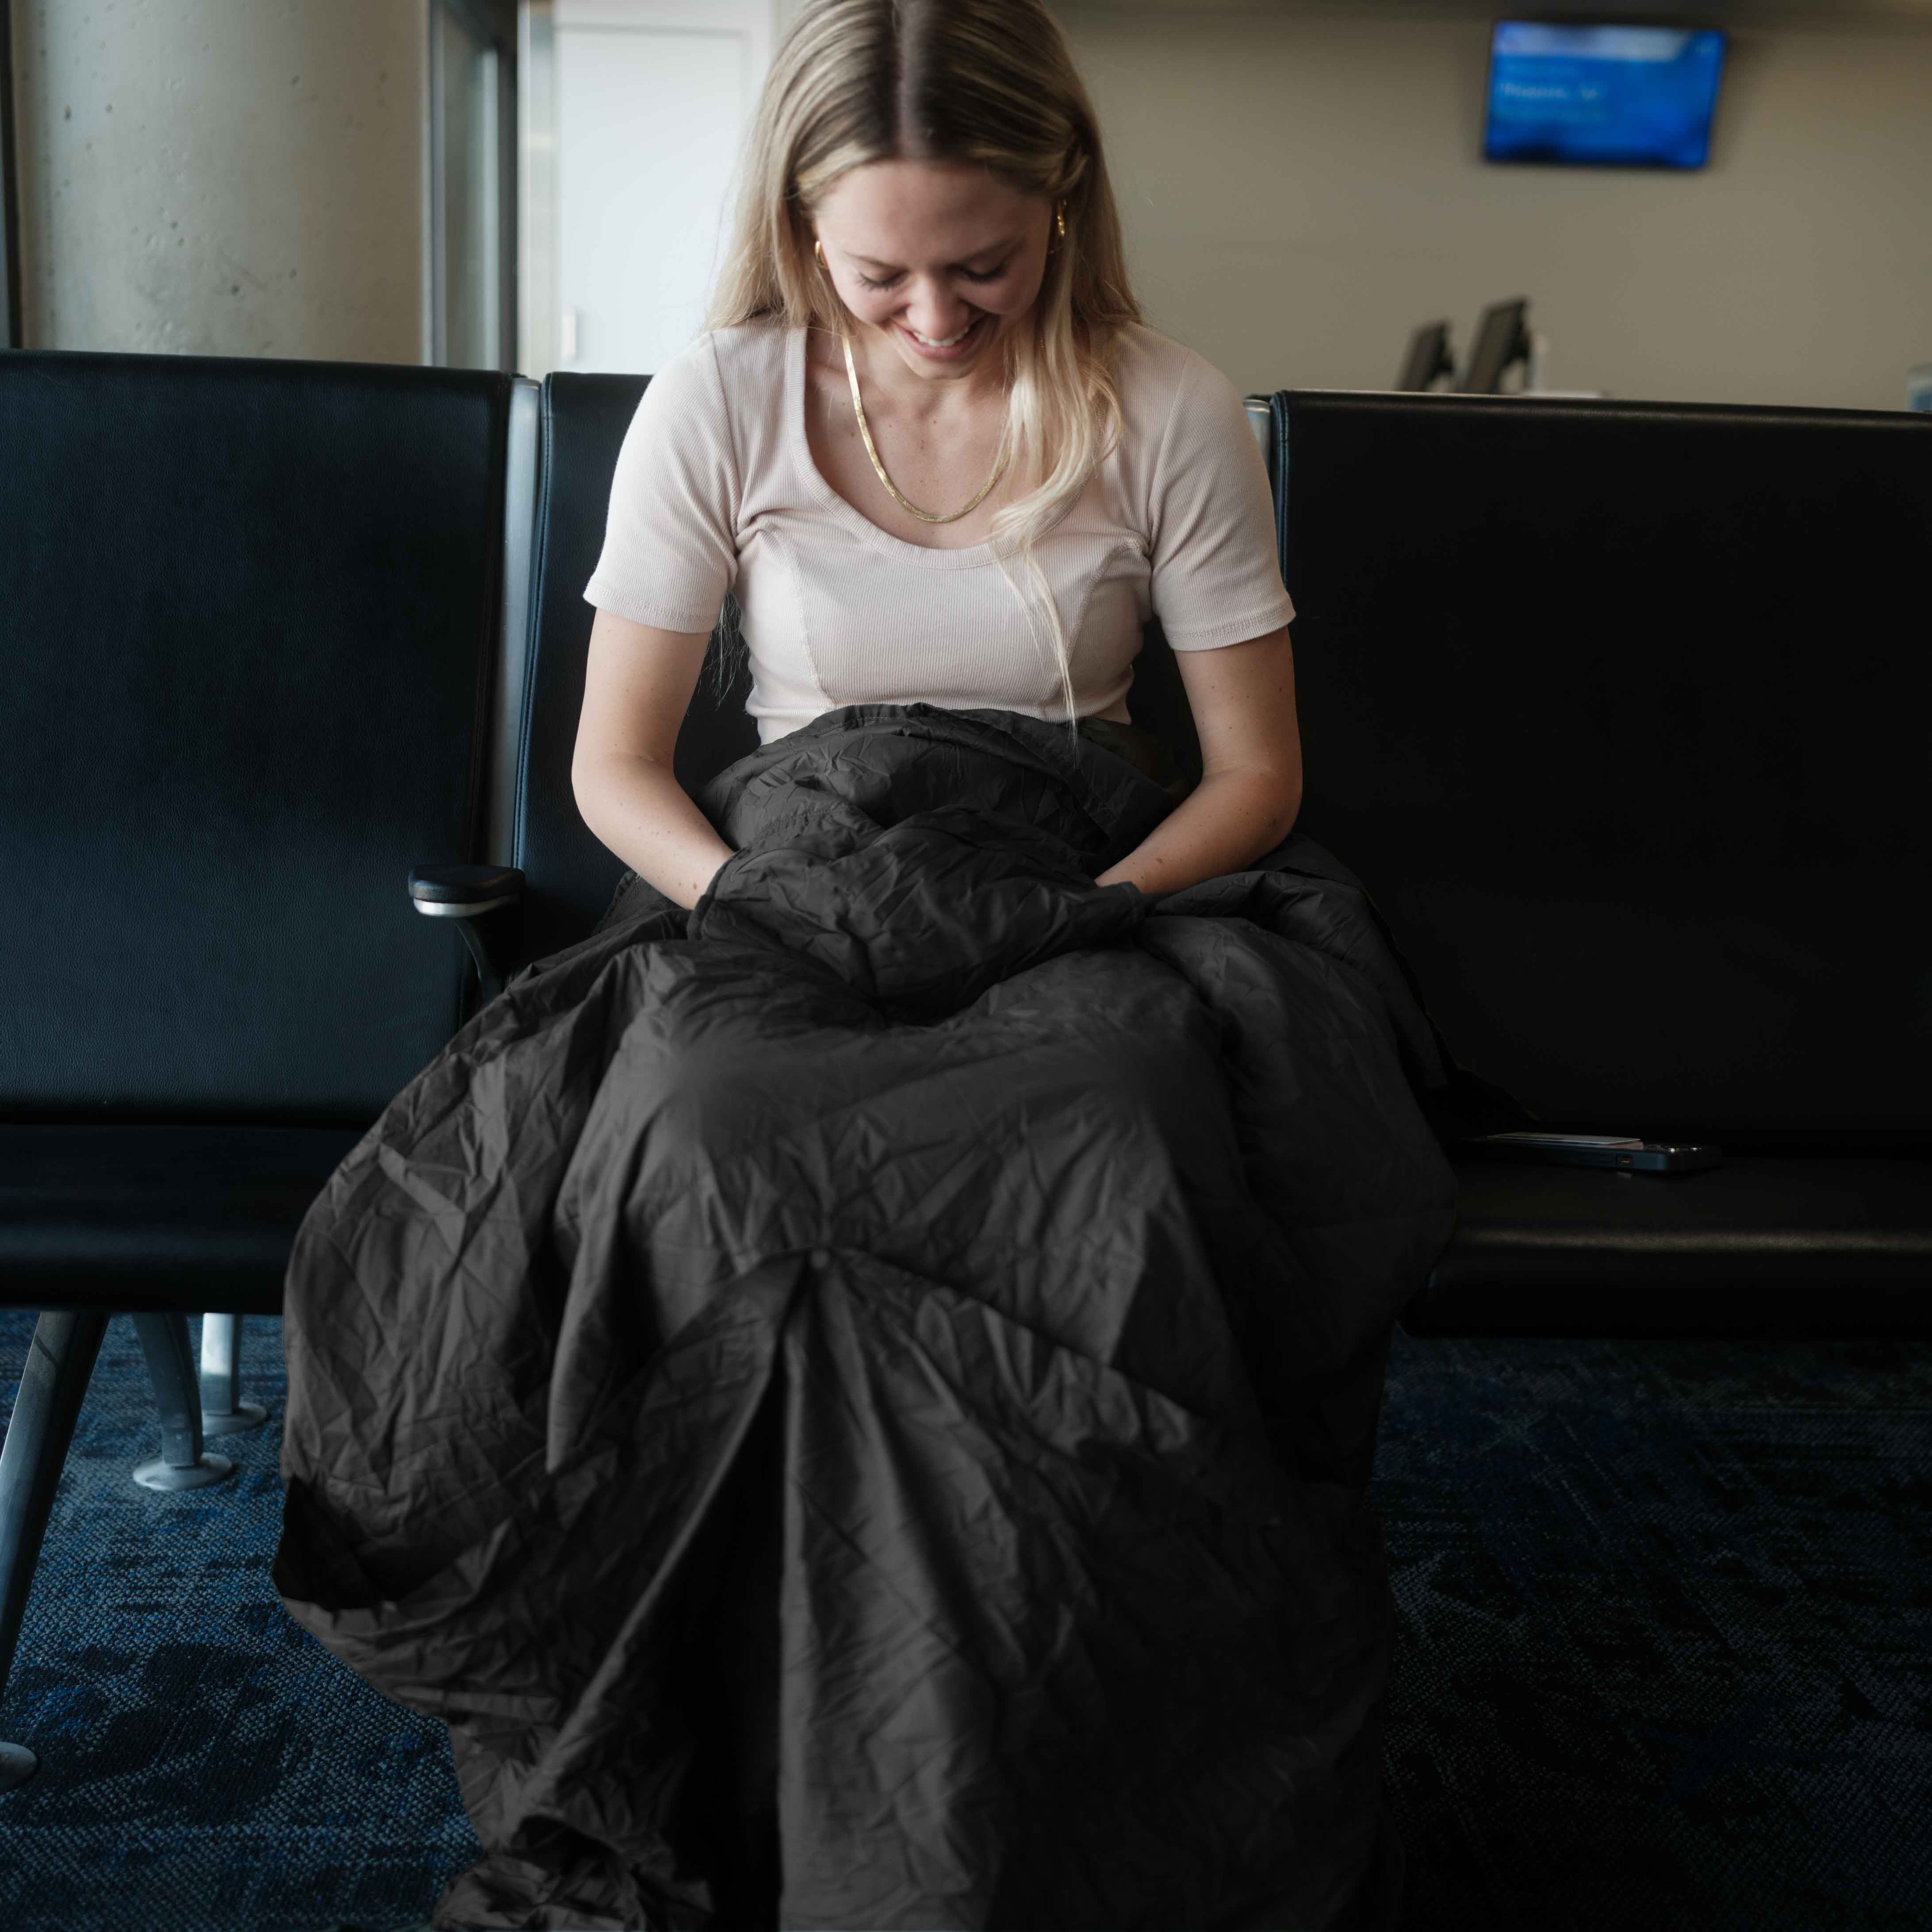 Layover™ Travel Blanket - Insulated & Packable | Black